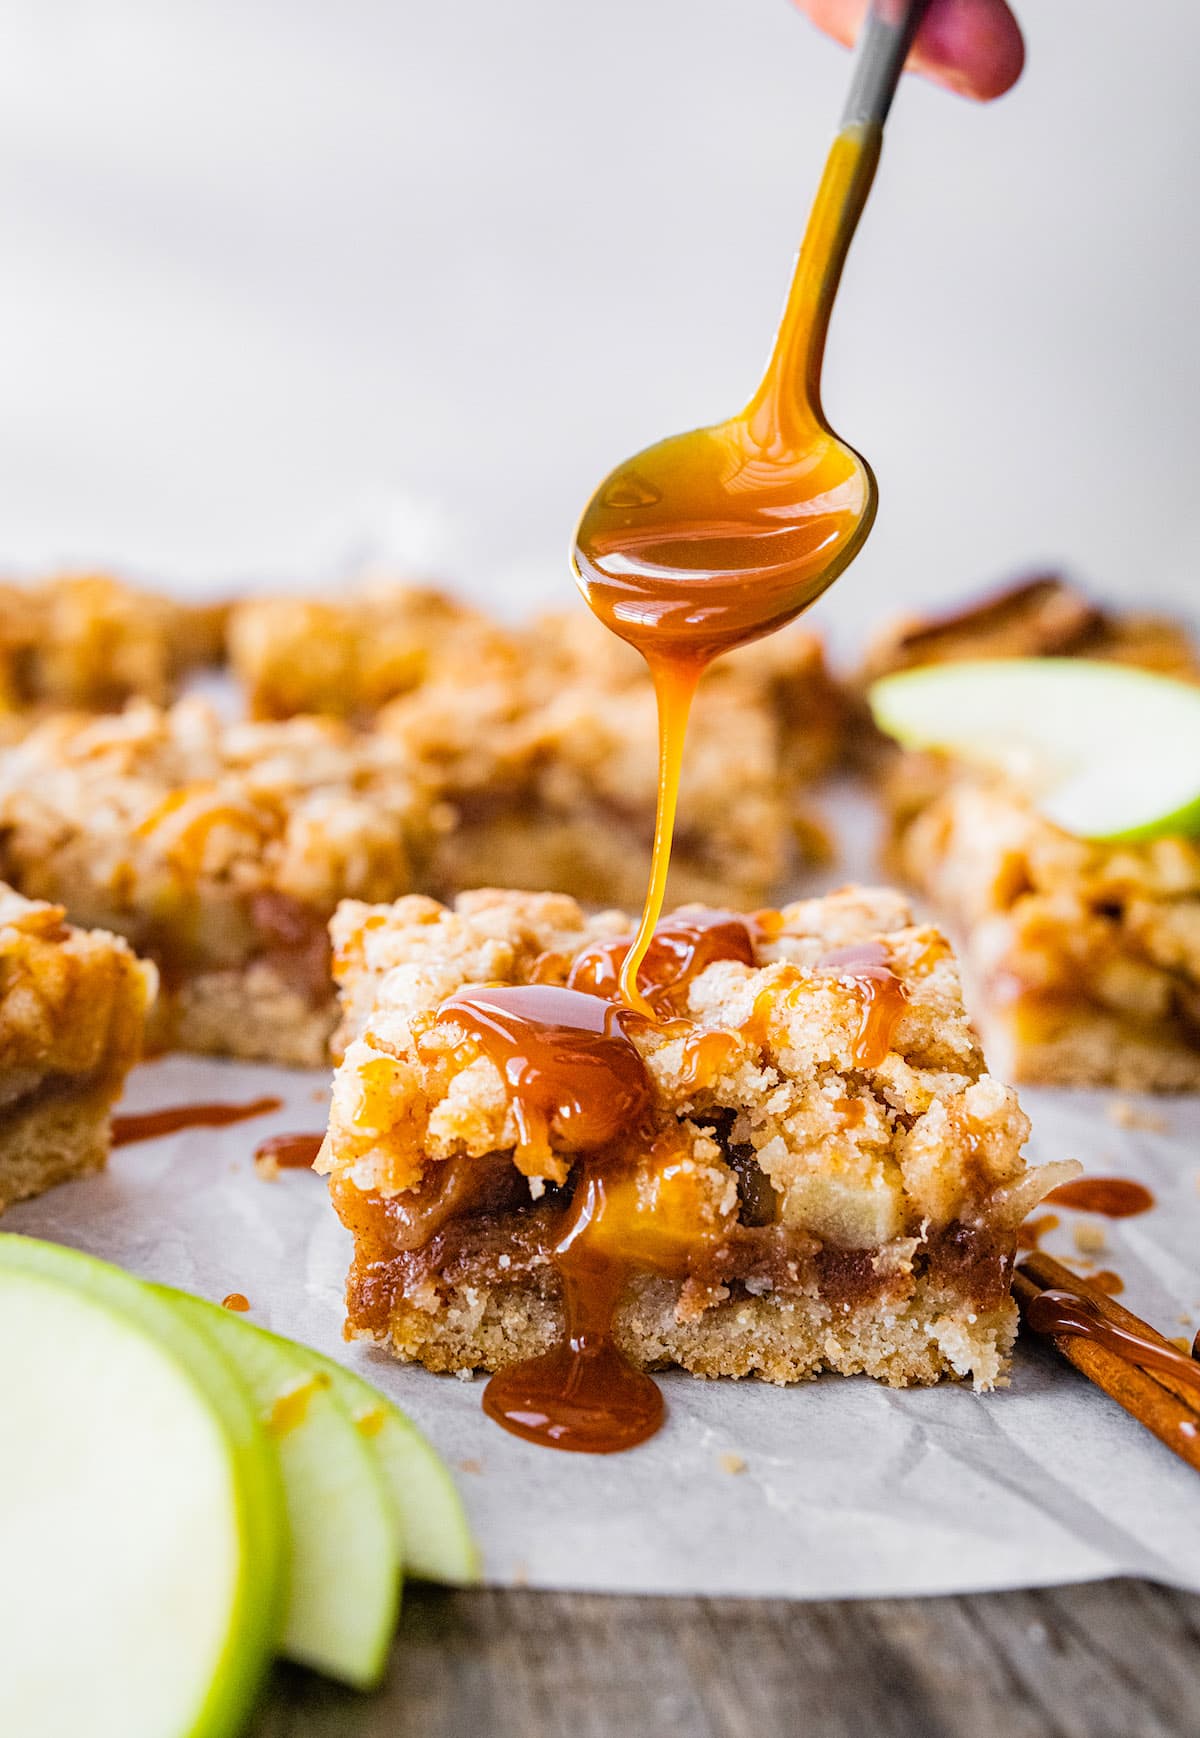 salted caramel apple crumb bars cut in squares with a drizzle of salted caramel sauce on top from a spoon.